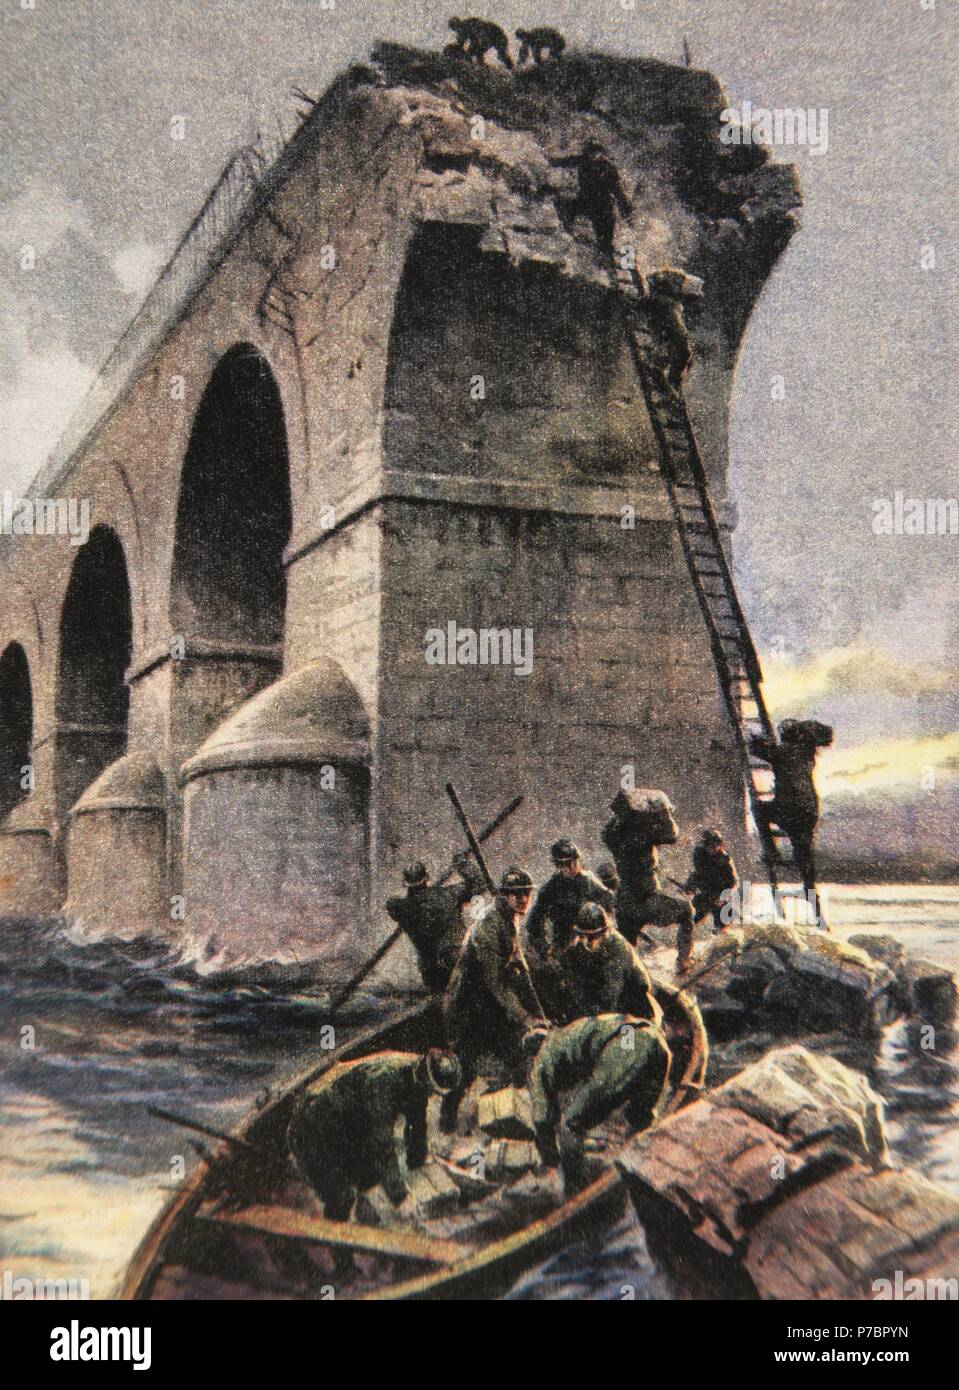 World War I (1914-1918). Assault bridge  in Piave river 'Fiume Sacro alla Patria' (River Sacred to the Country) in memory of the hard battles fought on tis banks during WWI, 1916. Drawing by Achille Beltrame (1871-1945). La Domenica del Corriere, 1916. Stock Photo